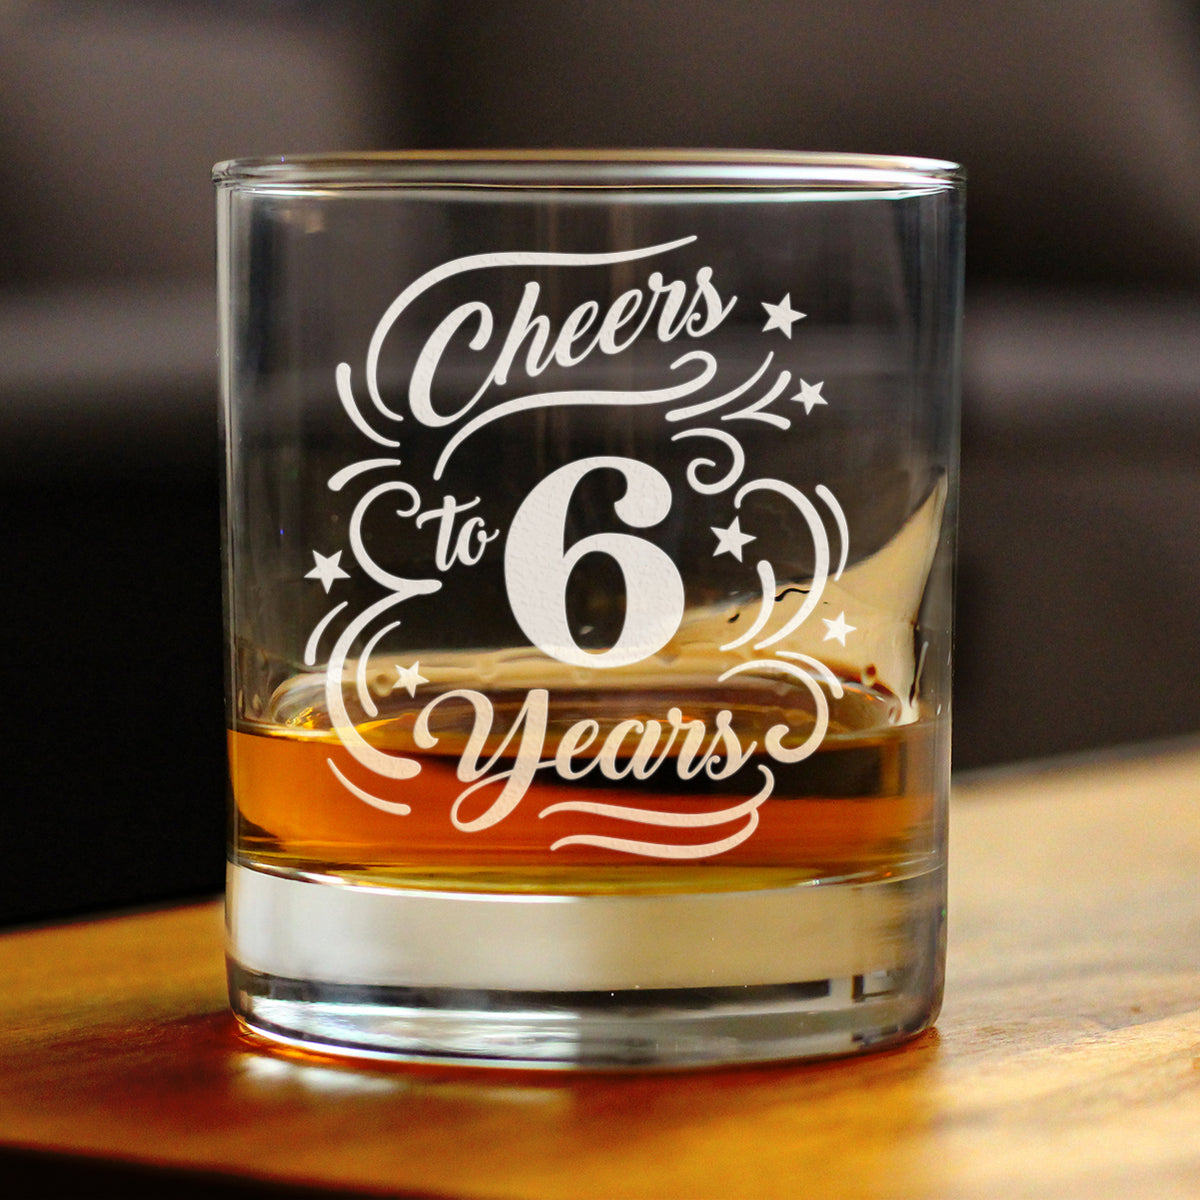 Cheers to 6 Years - Whiskey Rocks Glass Gifts for Women &amp; Men - 6th Anniversary Party Decor - 10.25 Oz Glasses